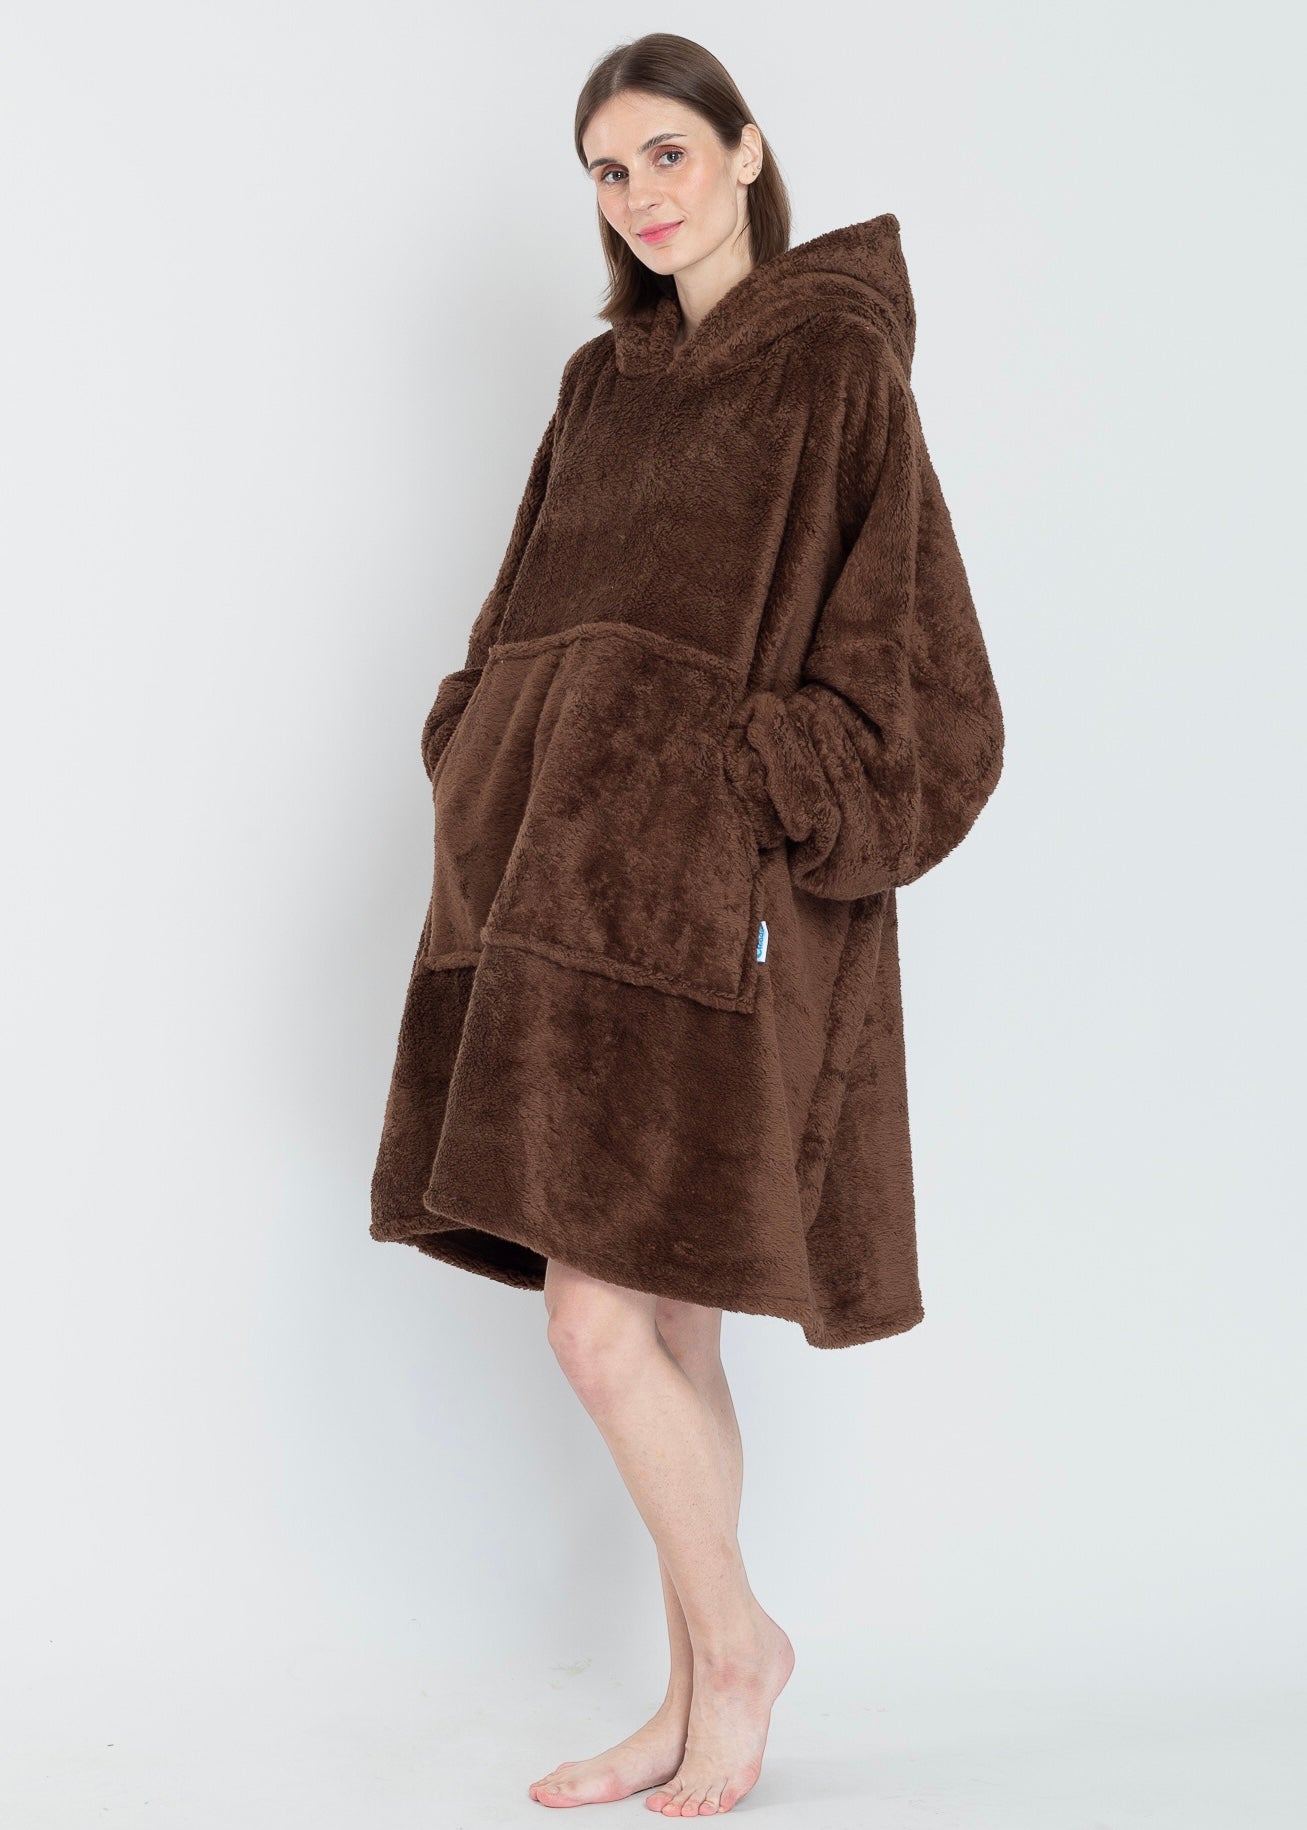 Chocolate Brown Cloudie® Luxe - The Cloudie Co. ultra soft cosy comfy Giant Wearable Blanket hoodie Unisex home or travel blanket hoodie travel blanket sofa blanket with sleeves hoodie blanket